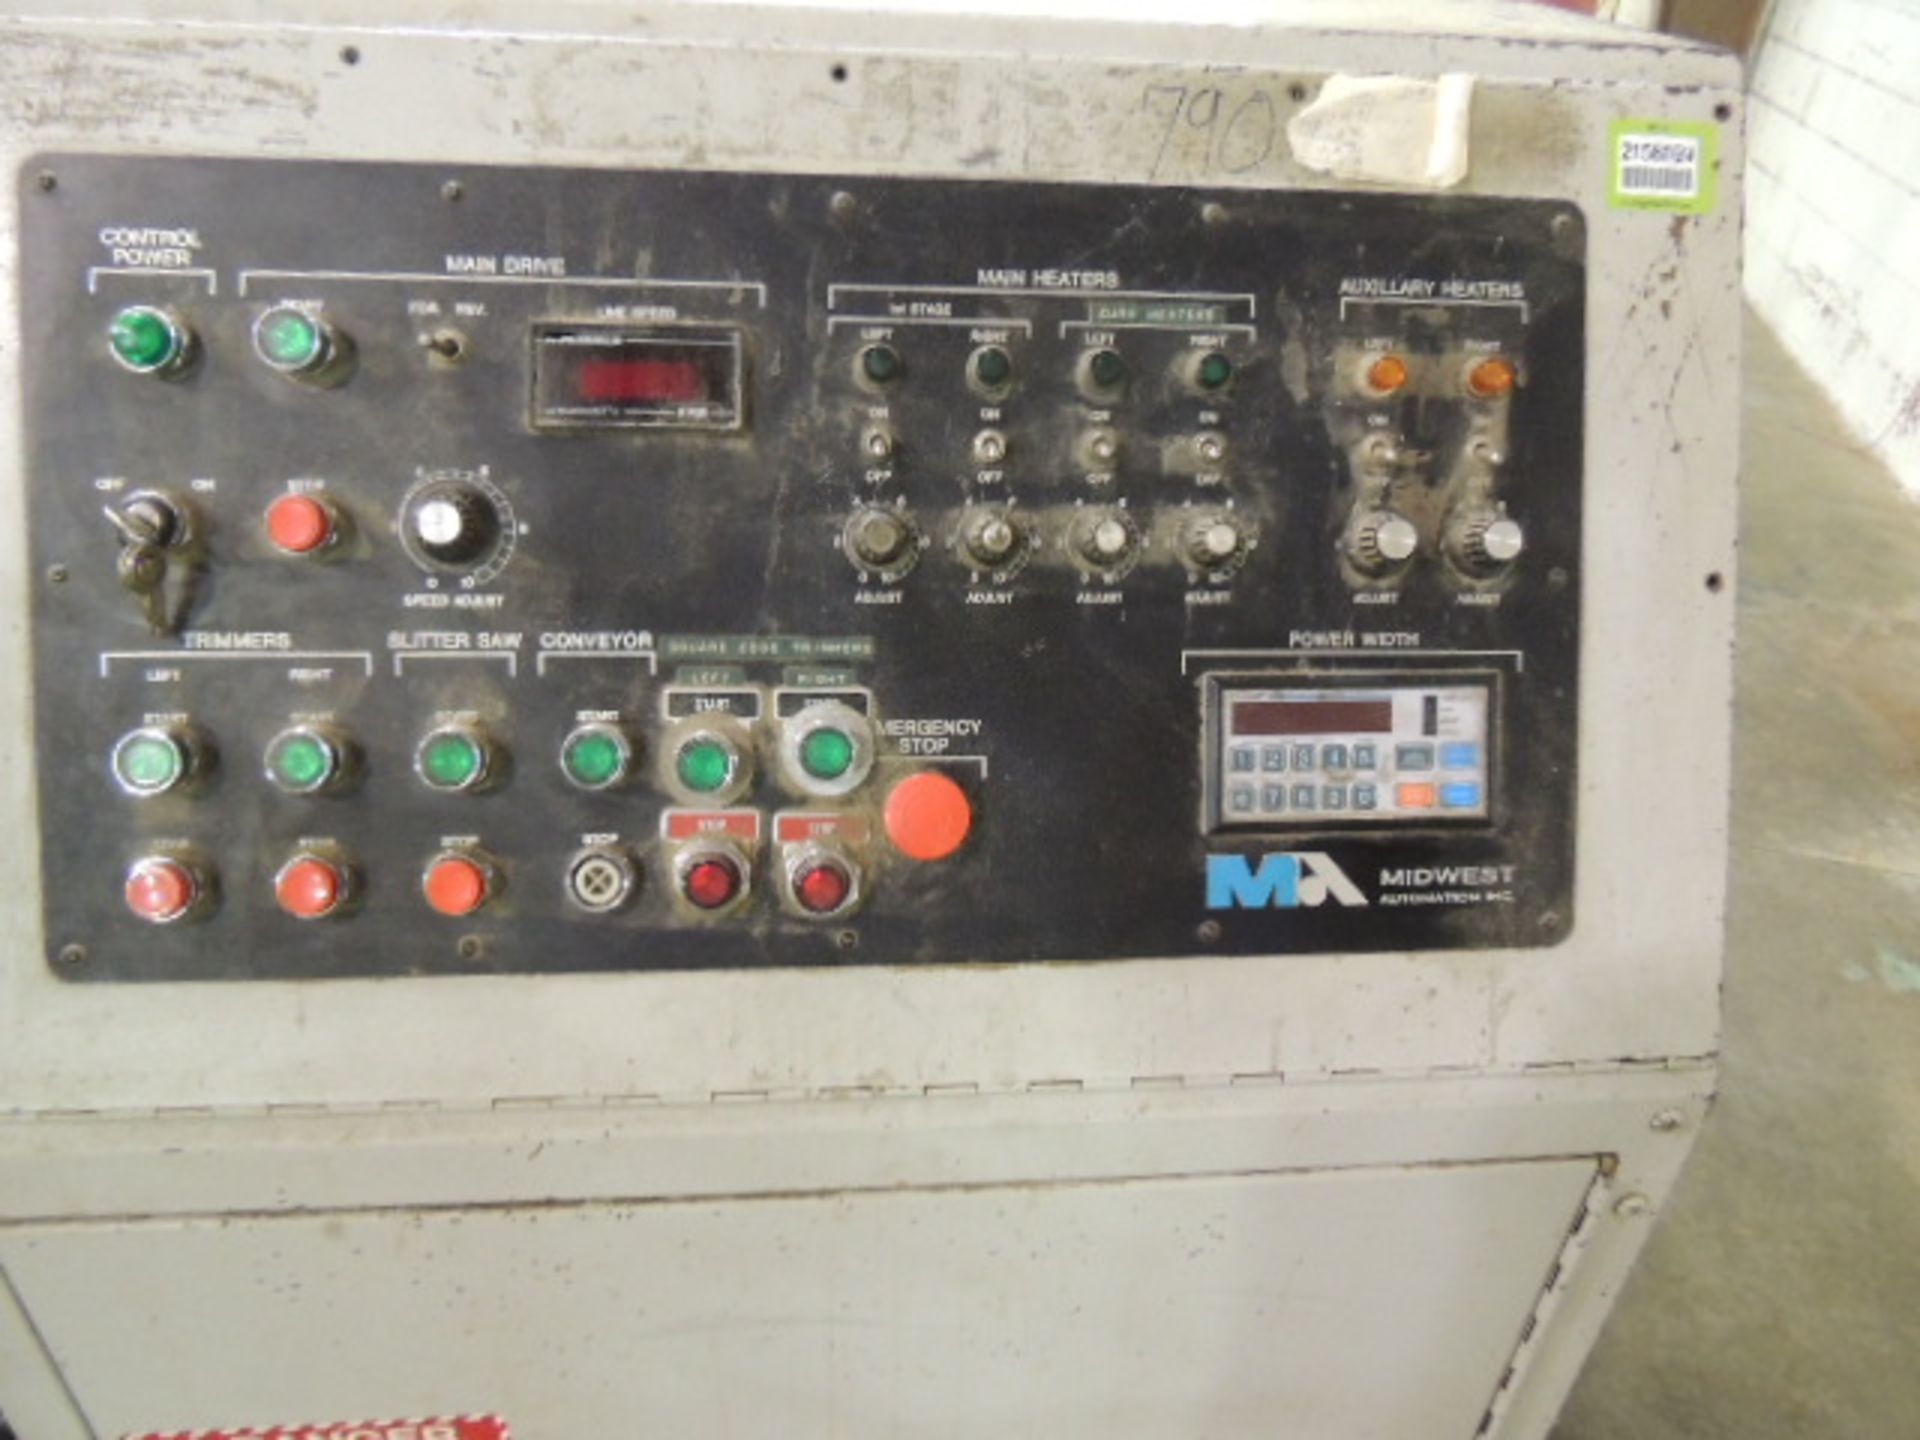 Midwest Automation SF 2180 Control panel , 460/60/3, infeed and under wrap heaters, 230/400v,60v, (